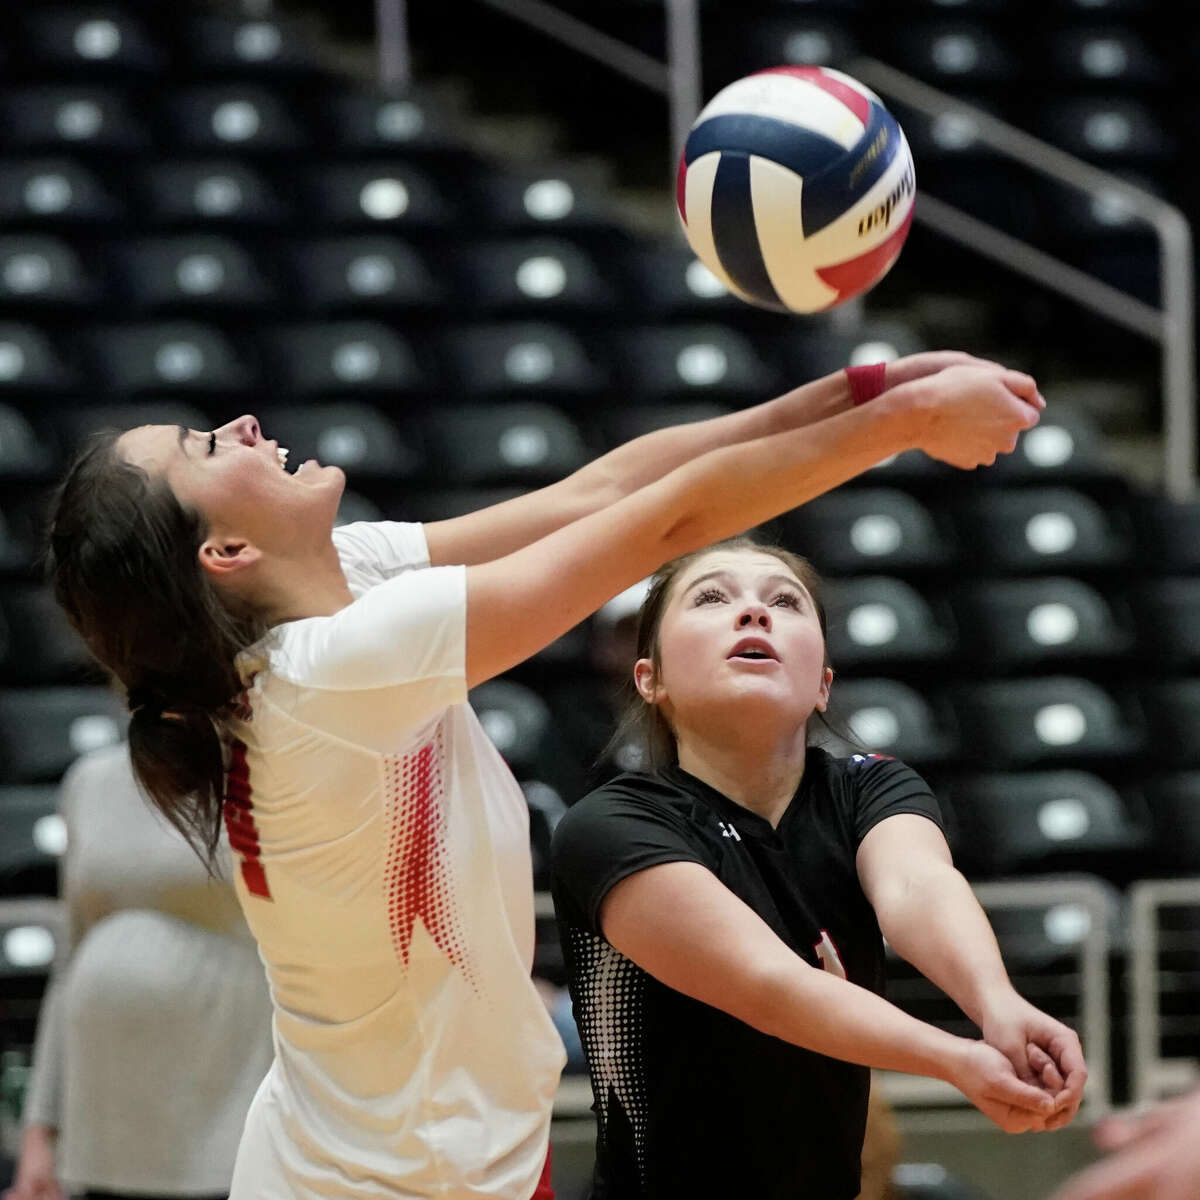 Huffman Hargrave's Erin Drvenkar, left, and Addison Shannon converge on the ball against Canyon Randall High School in their state semifinal volleyball match, won by Canyon Randle, on Wednesday, November 17, 2022 at the Curtis Culwell Center in Garland, Texas. CREDIT: Louis DeLuca for the Houston Chronicle